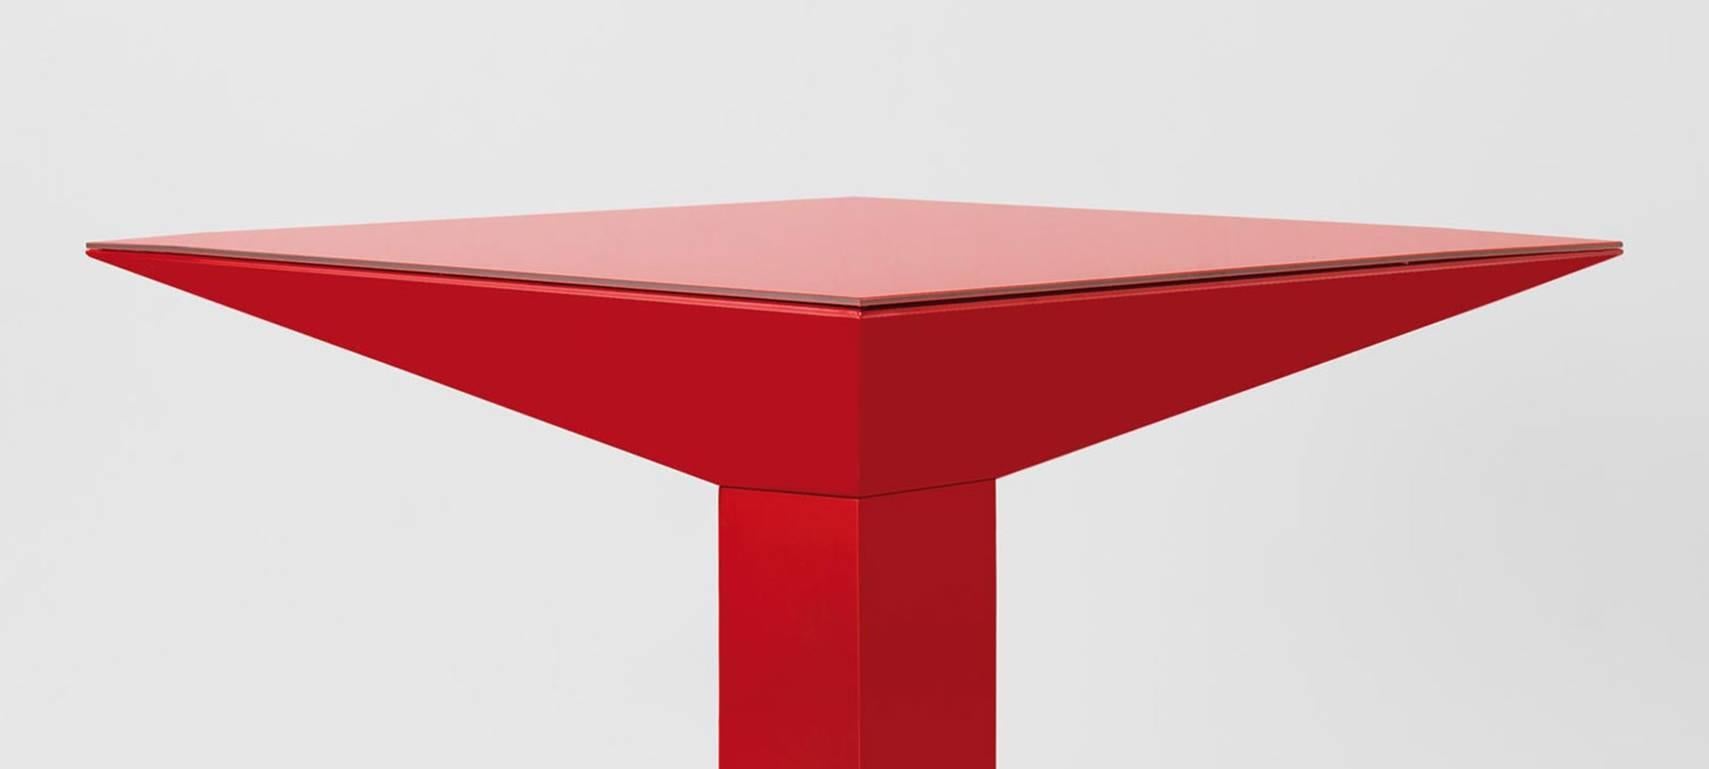 Mettsass table designed by Ettore Sottsass in Barcelona manufactured by BD.

The structure is made of flat sheets of steel, painted in red RAL 3001. The glass is painted in the same color as the structure.

Measure: 110 x 110 x H 73 cm

In the